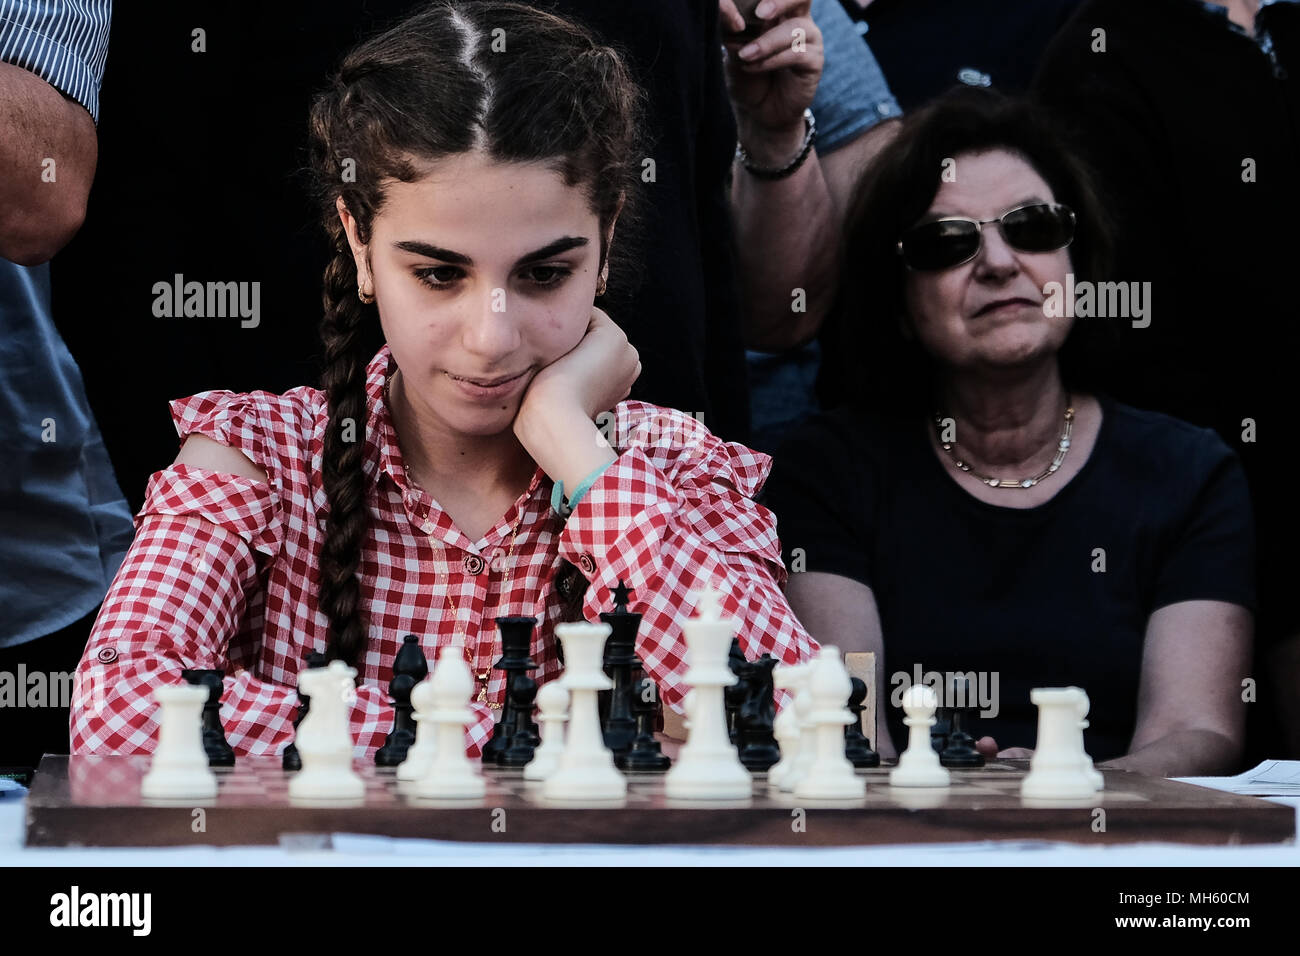 Jerusalem, Israel. 30th April, 2018. HUDA KASSEM, 13, from the Arab town Tira, studies her chess board as she plays against Anatoly Yevgenyevich Karpov (R), 66, Russian chess grandmaster, as he plays against dozens of Israeli youth champions simultaneously at the Jaffa Gate in the framework of Israel's 70th Independence Day celebrations. Credit: Nir Alon/Alamy Live News Stock Photo